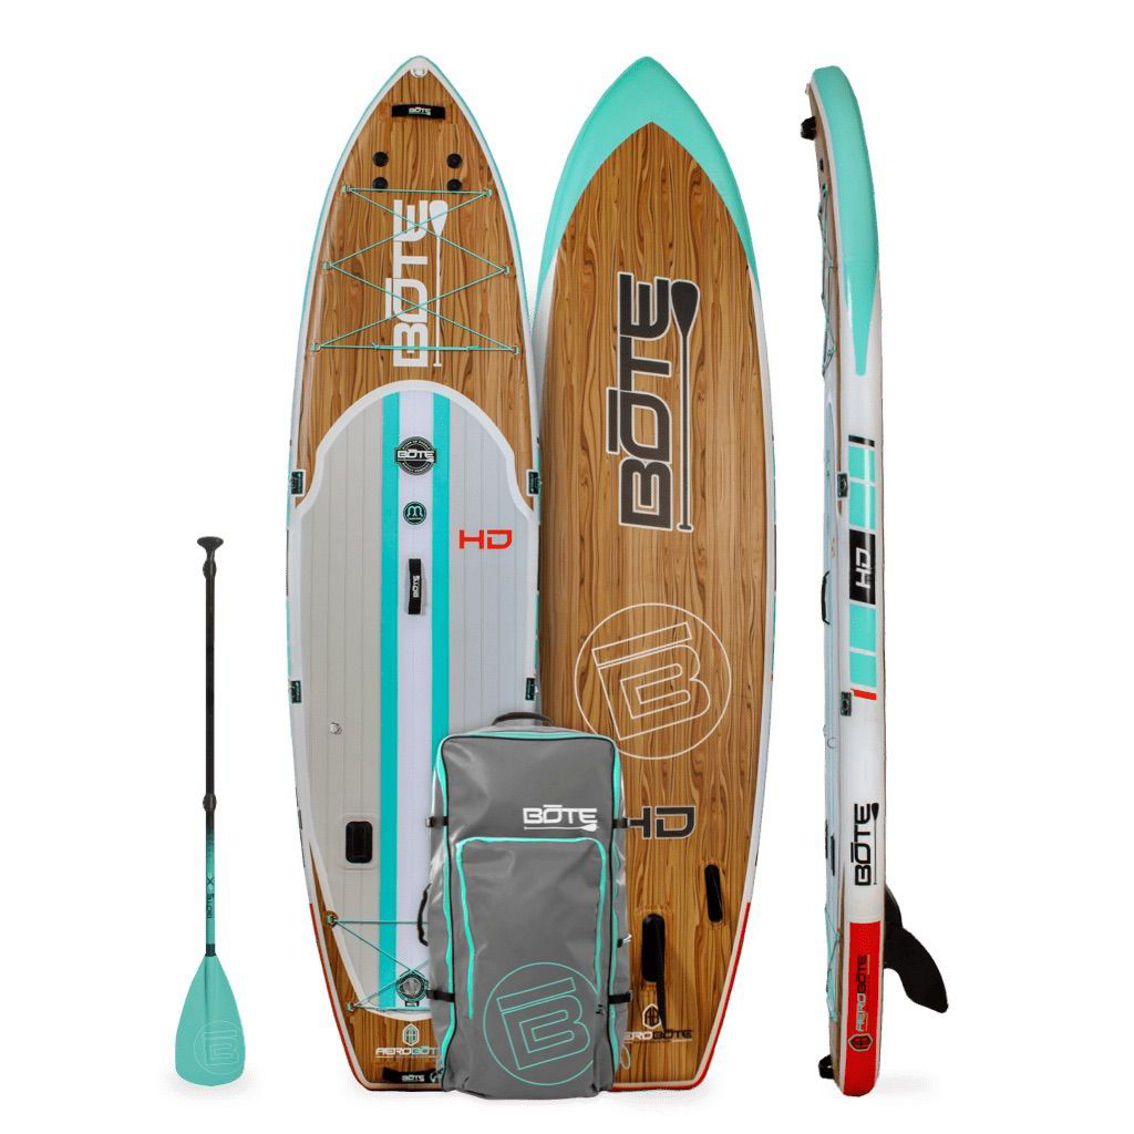 BOTE SUP HD Aero 11 FT 6 Inch Inflatable Stand Up Paddle Board